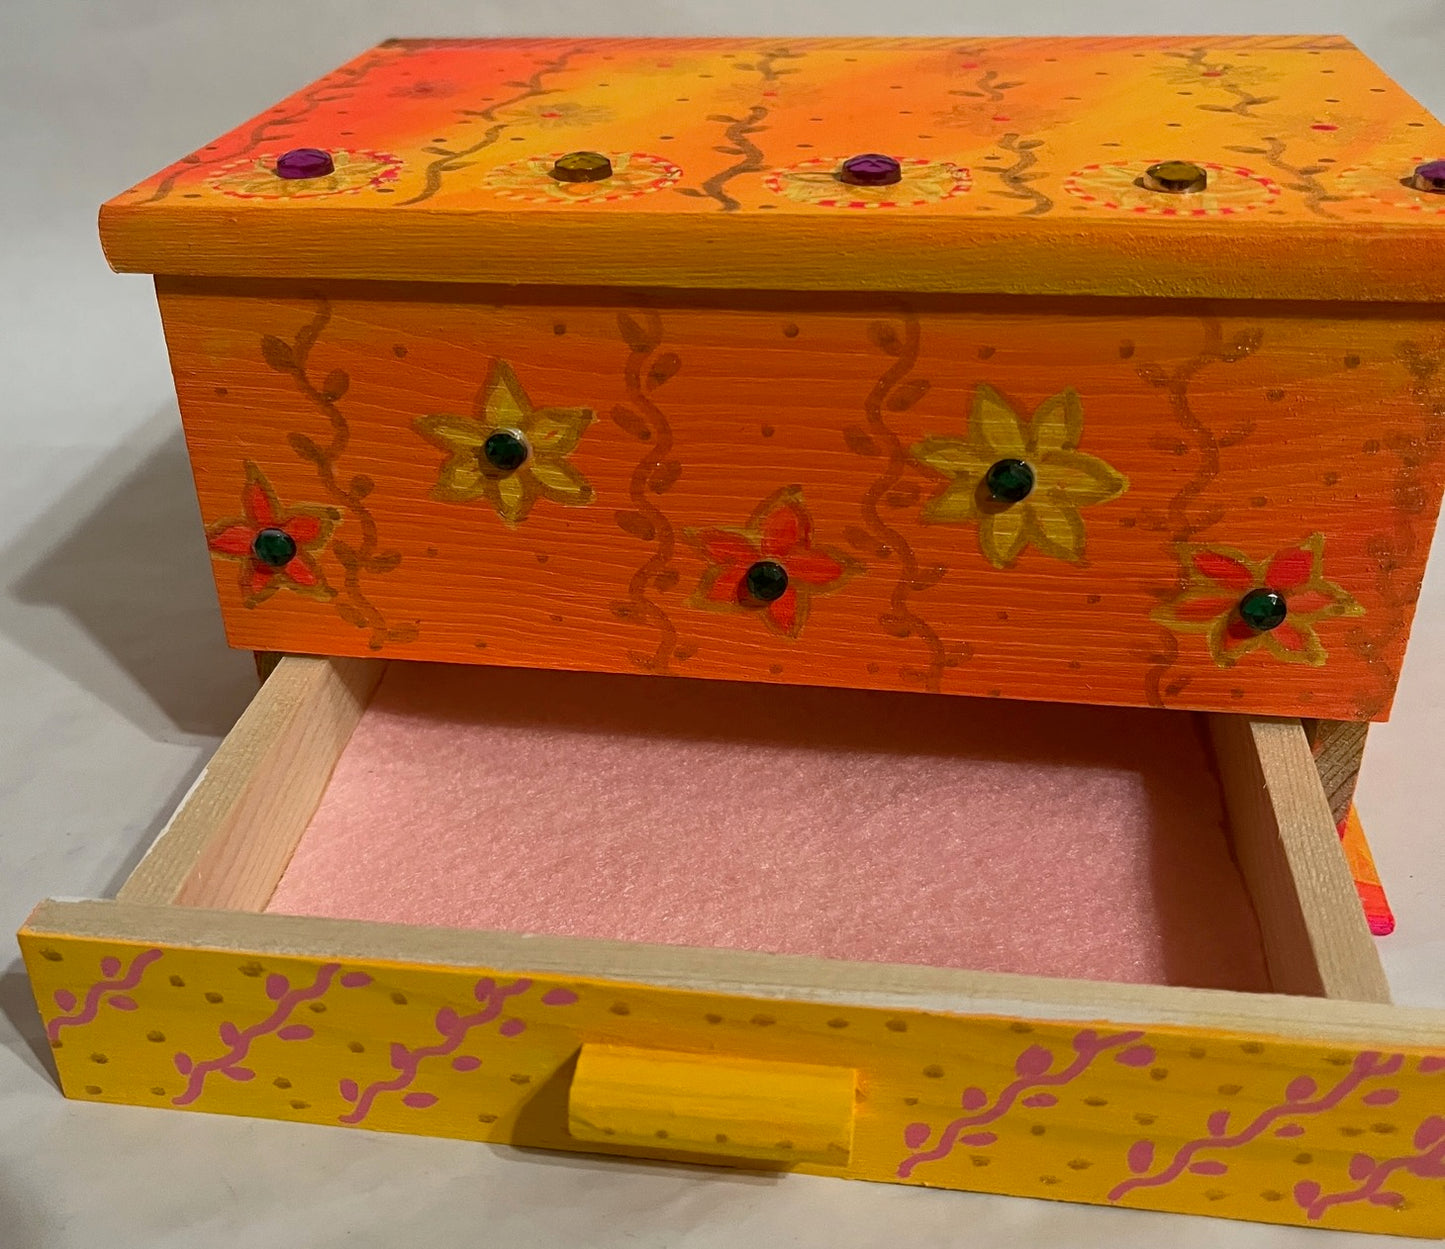 A hand painted wood jewelry box